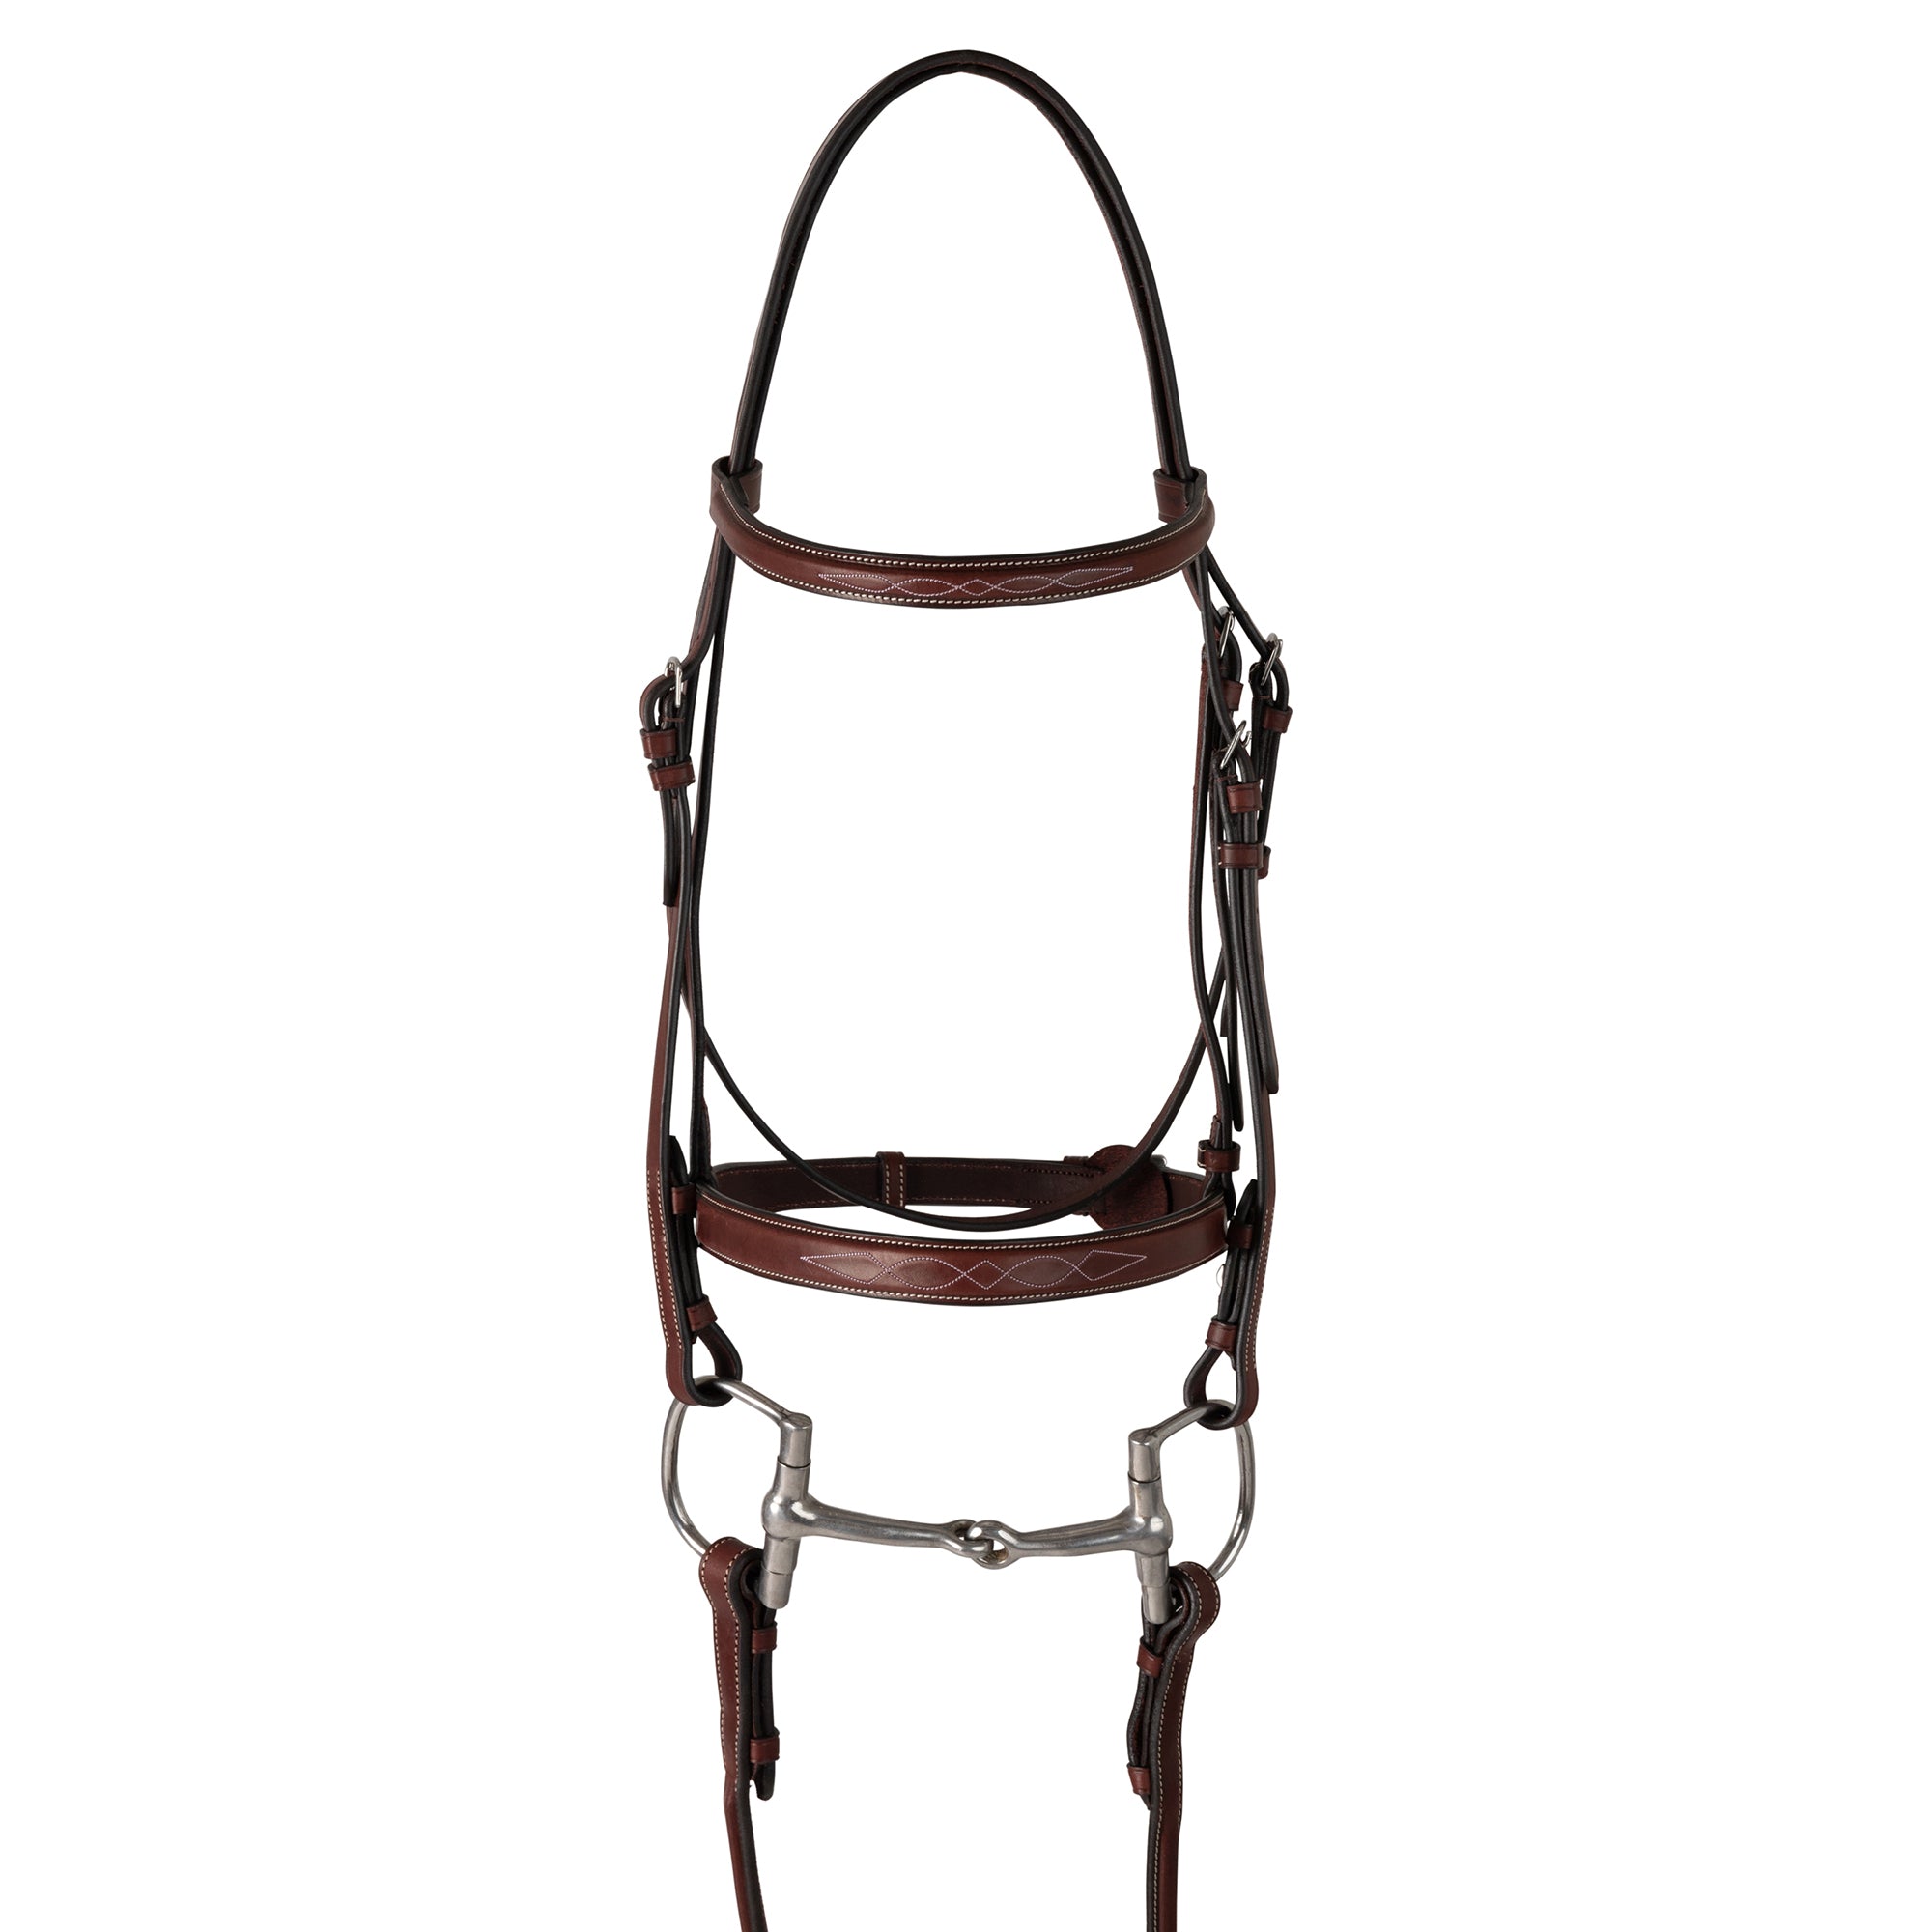 Huntley Equestrian Fancy Stitched Schooling Hunter Bridle with Reins